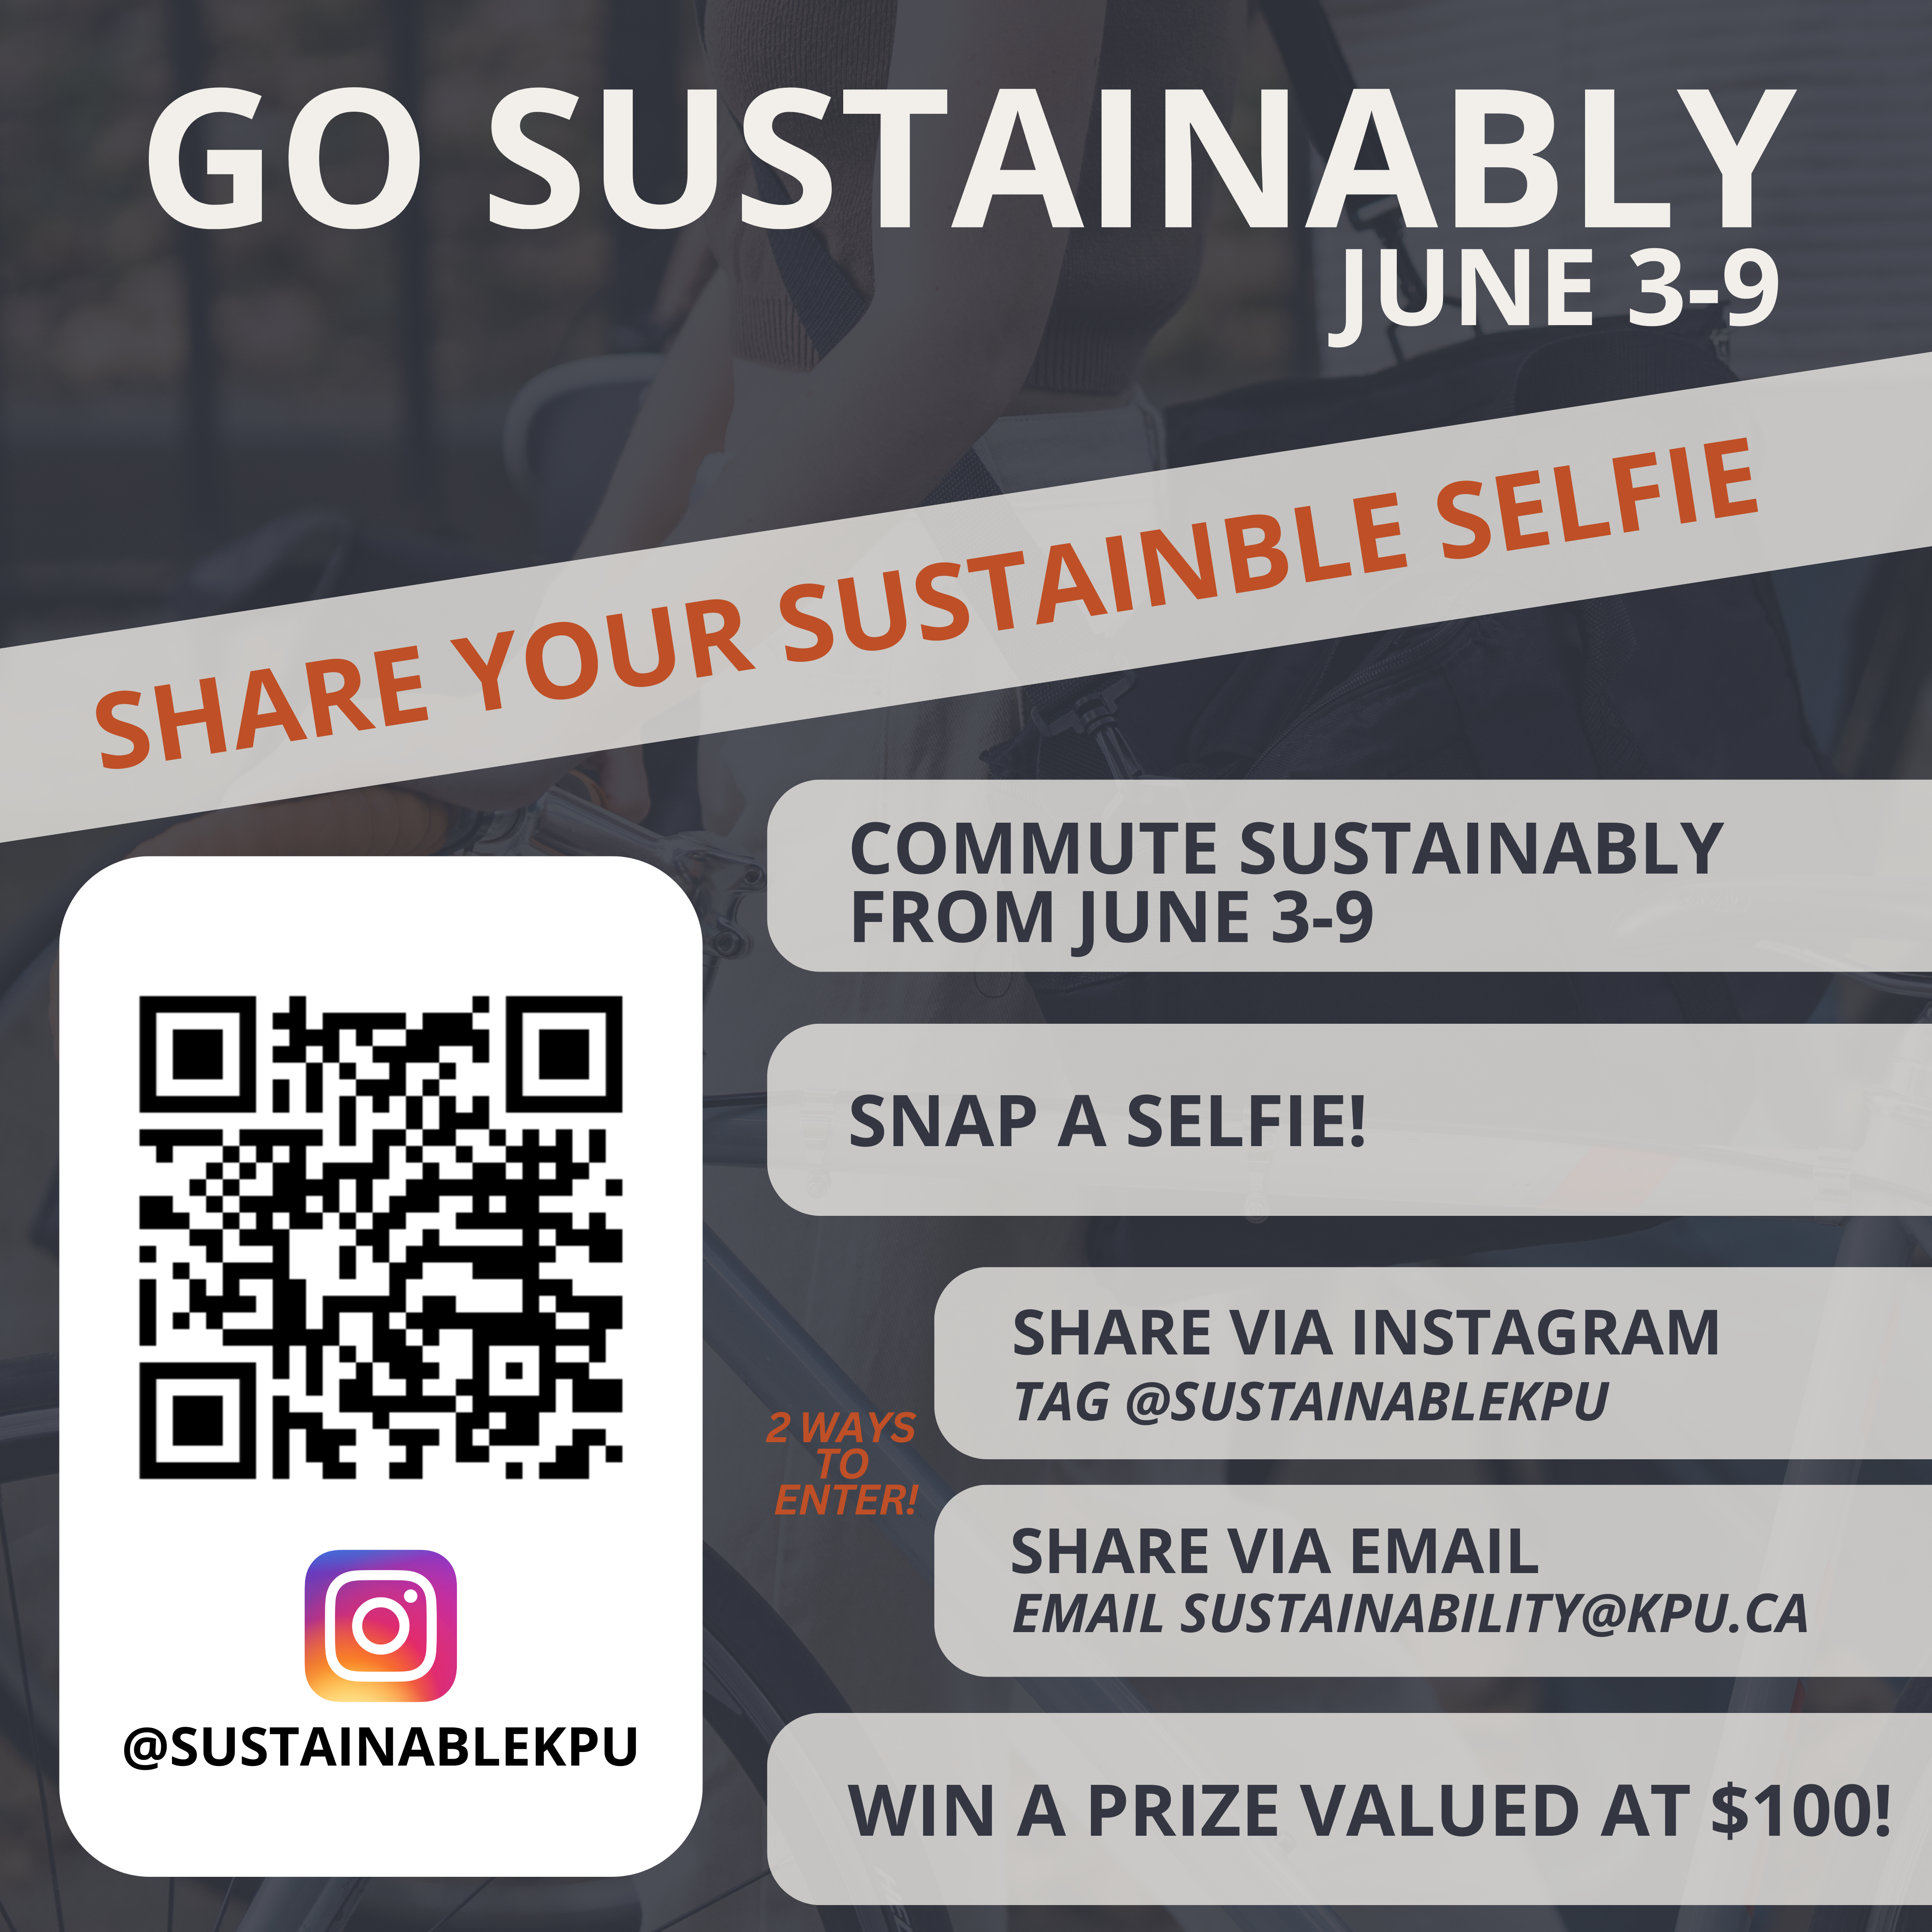 go sustainably event June 3 to June 9